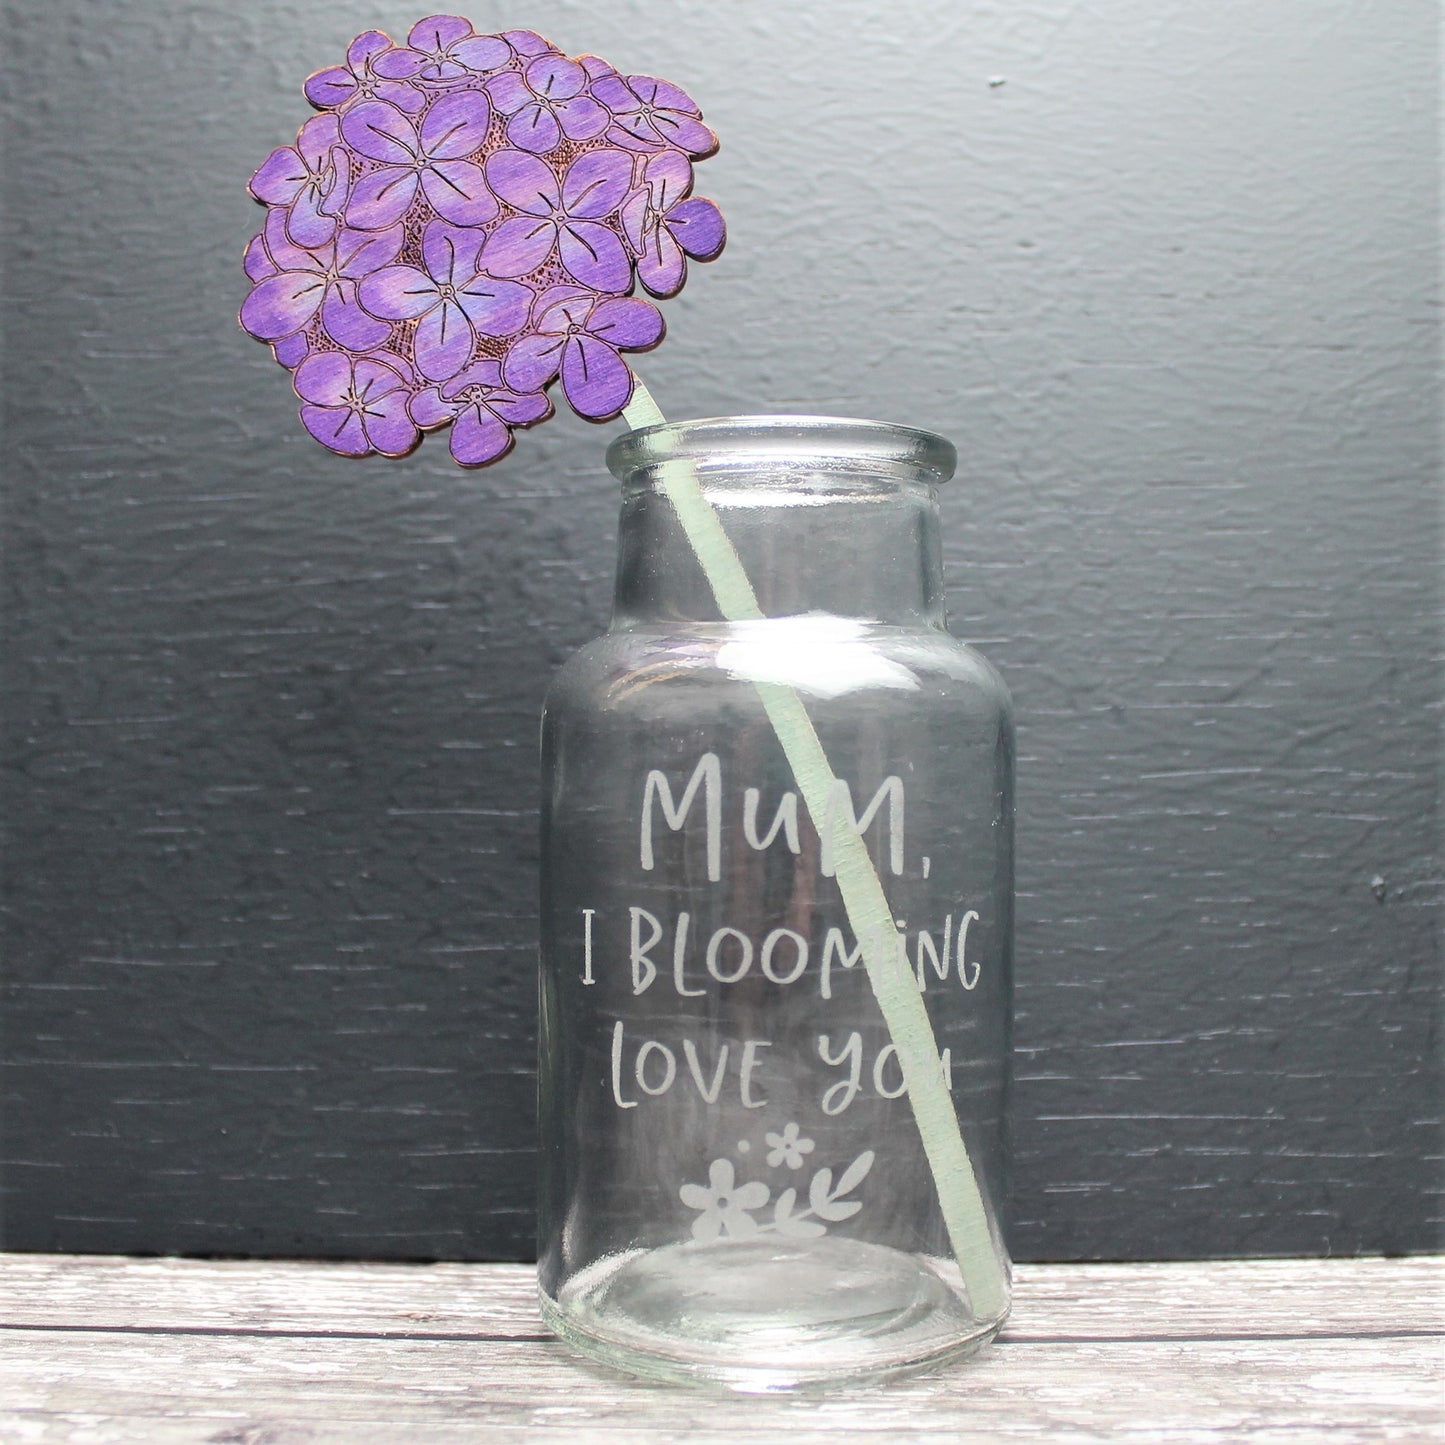 Engraved glass vase with wooden hand painted hydrangea